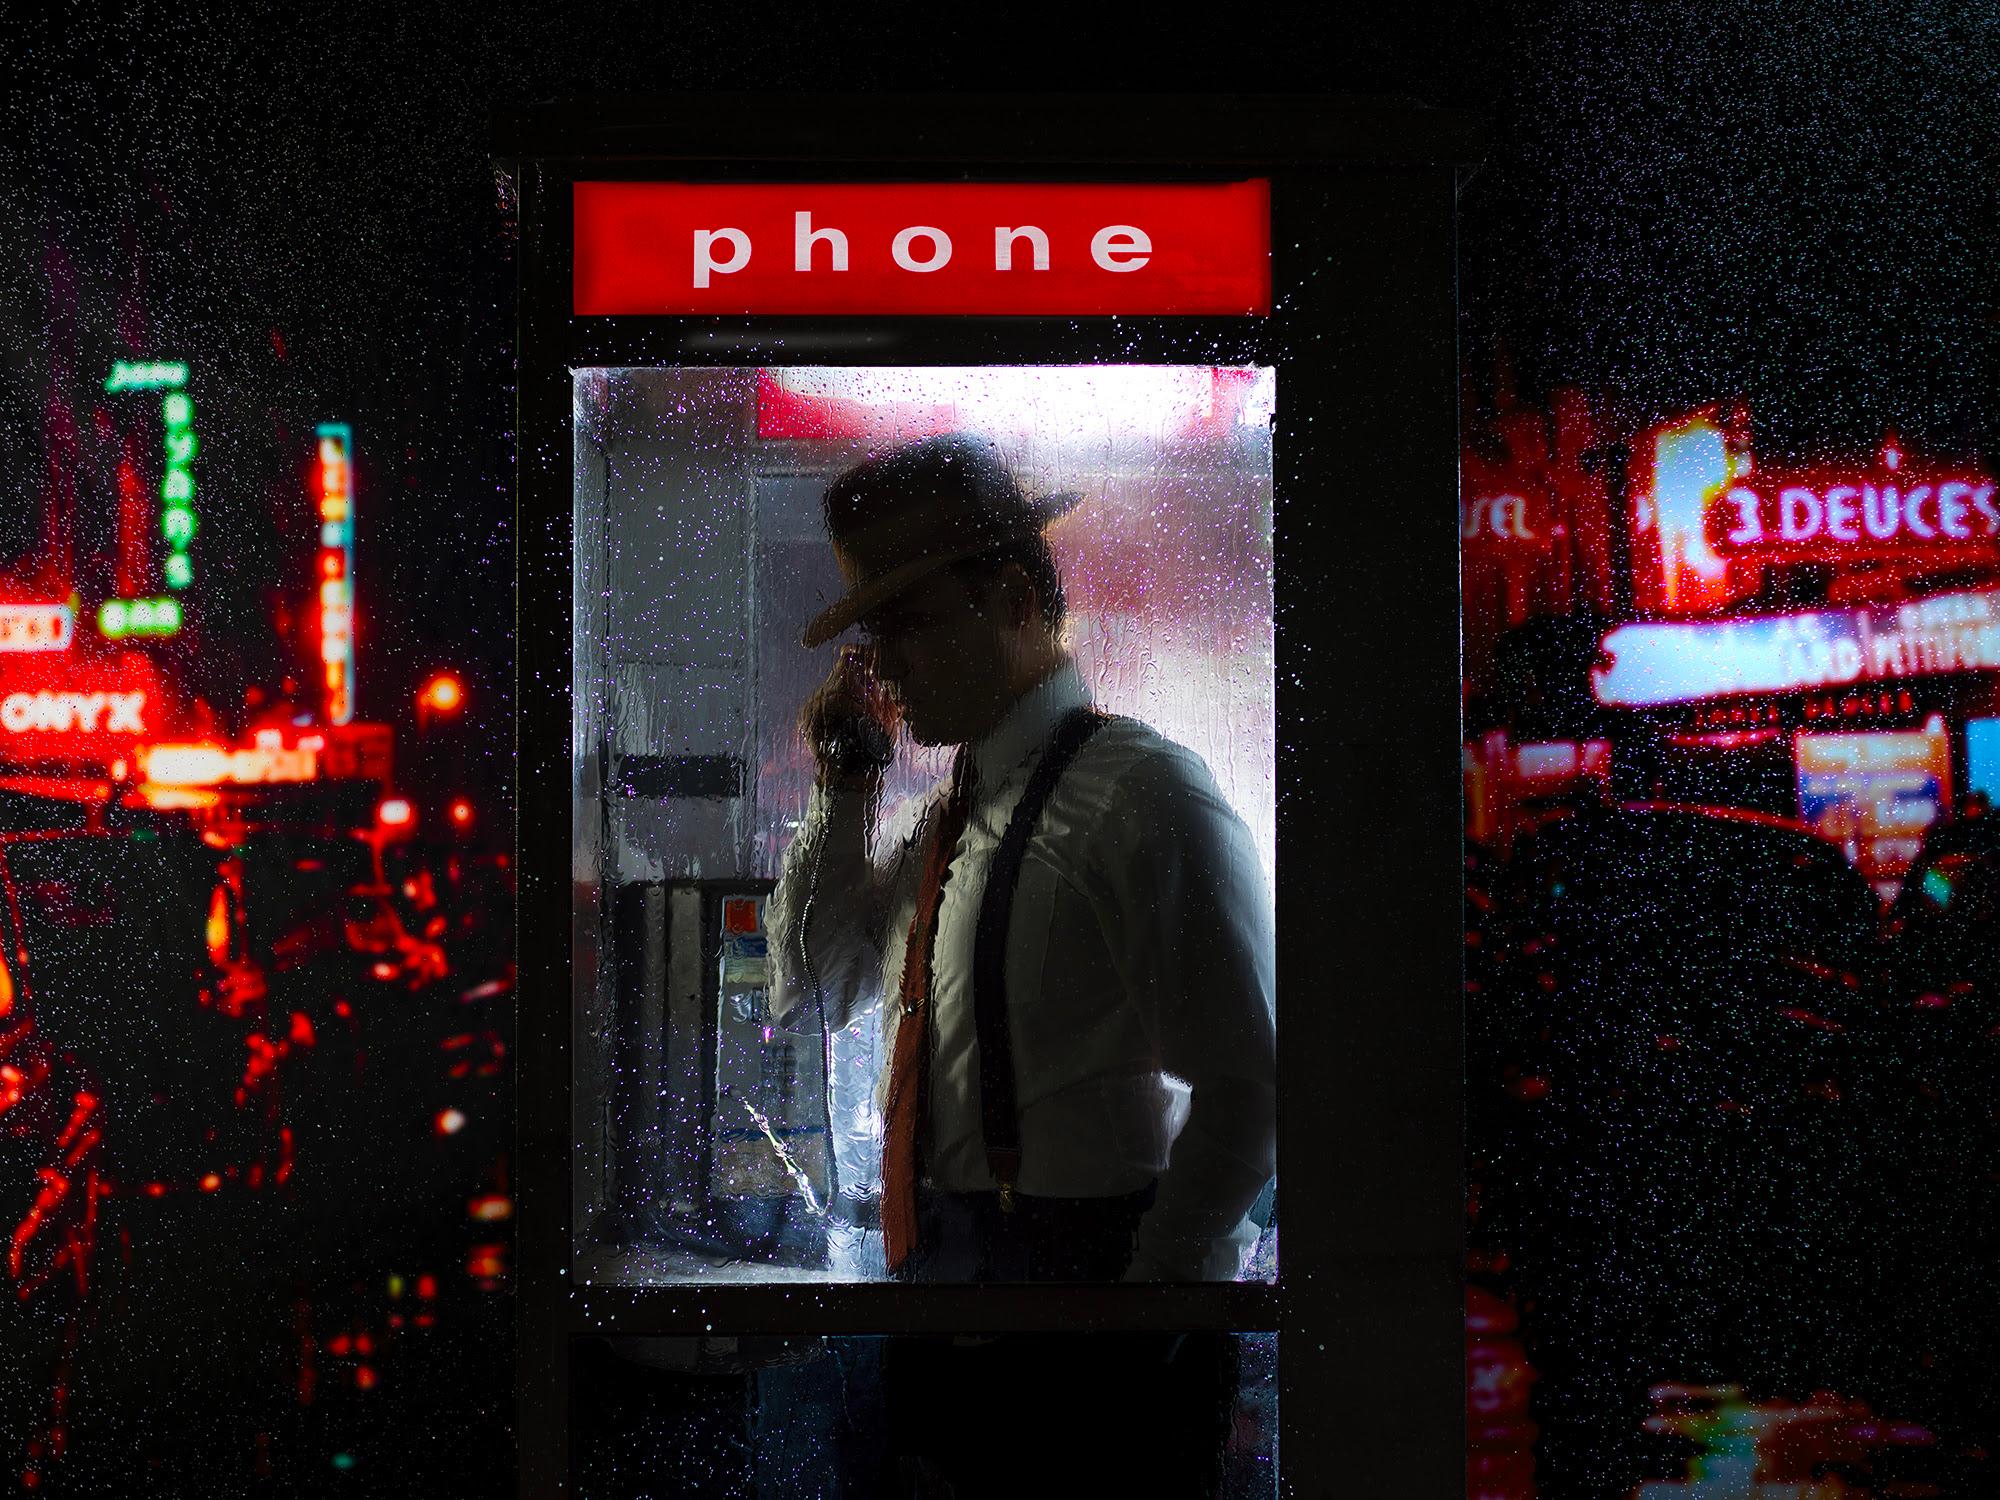 The Man in the Phone Booth (45" x 60")